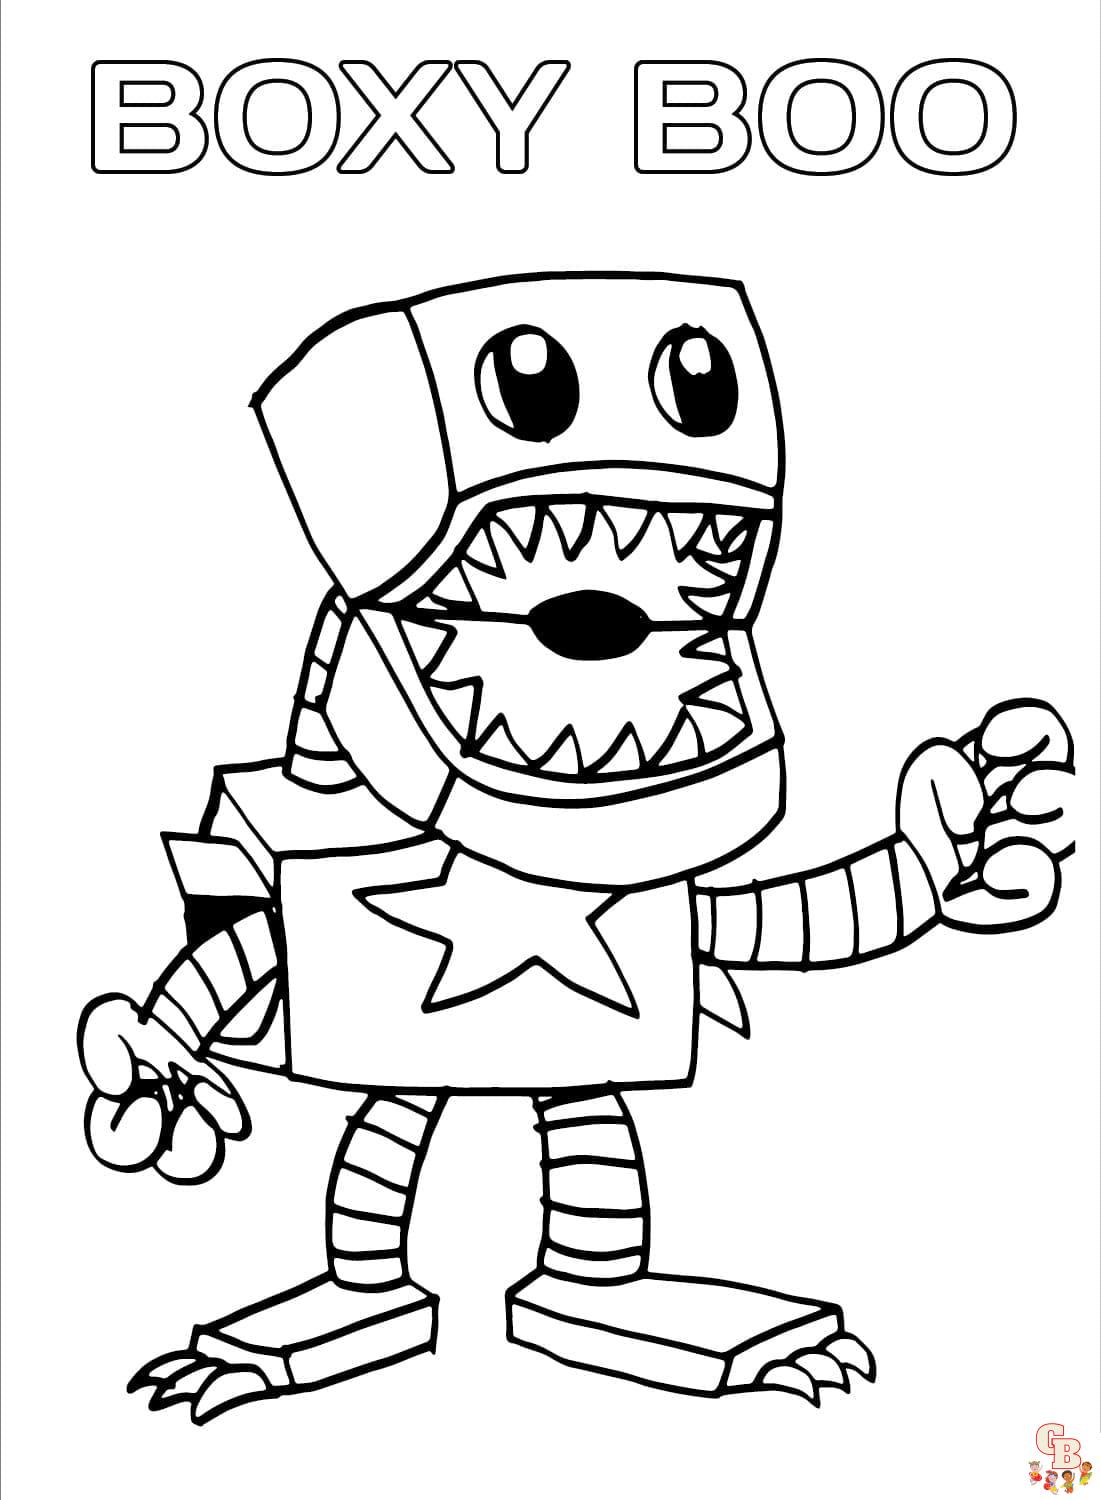 Poppy coloring page